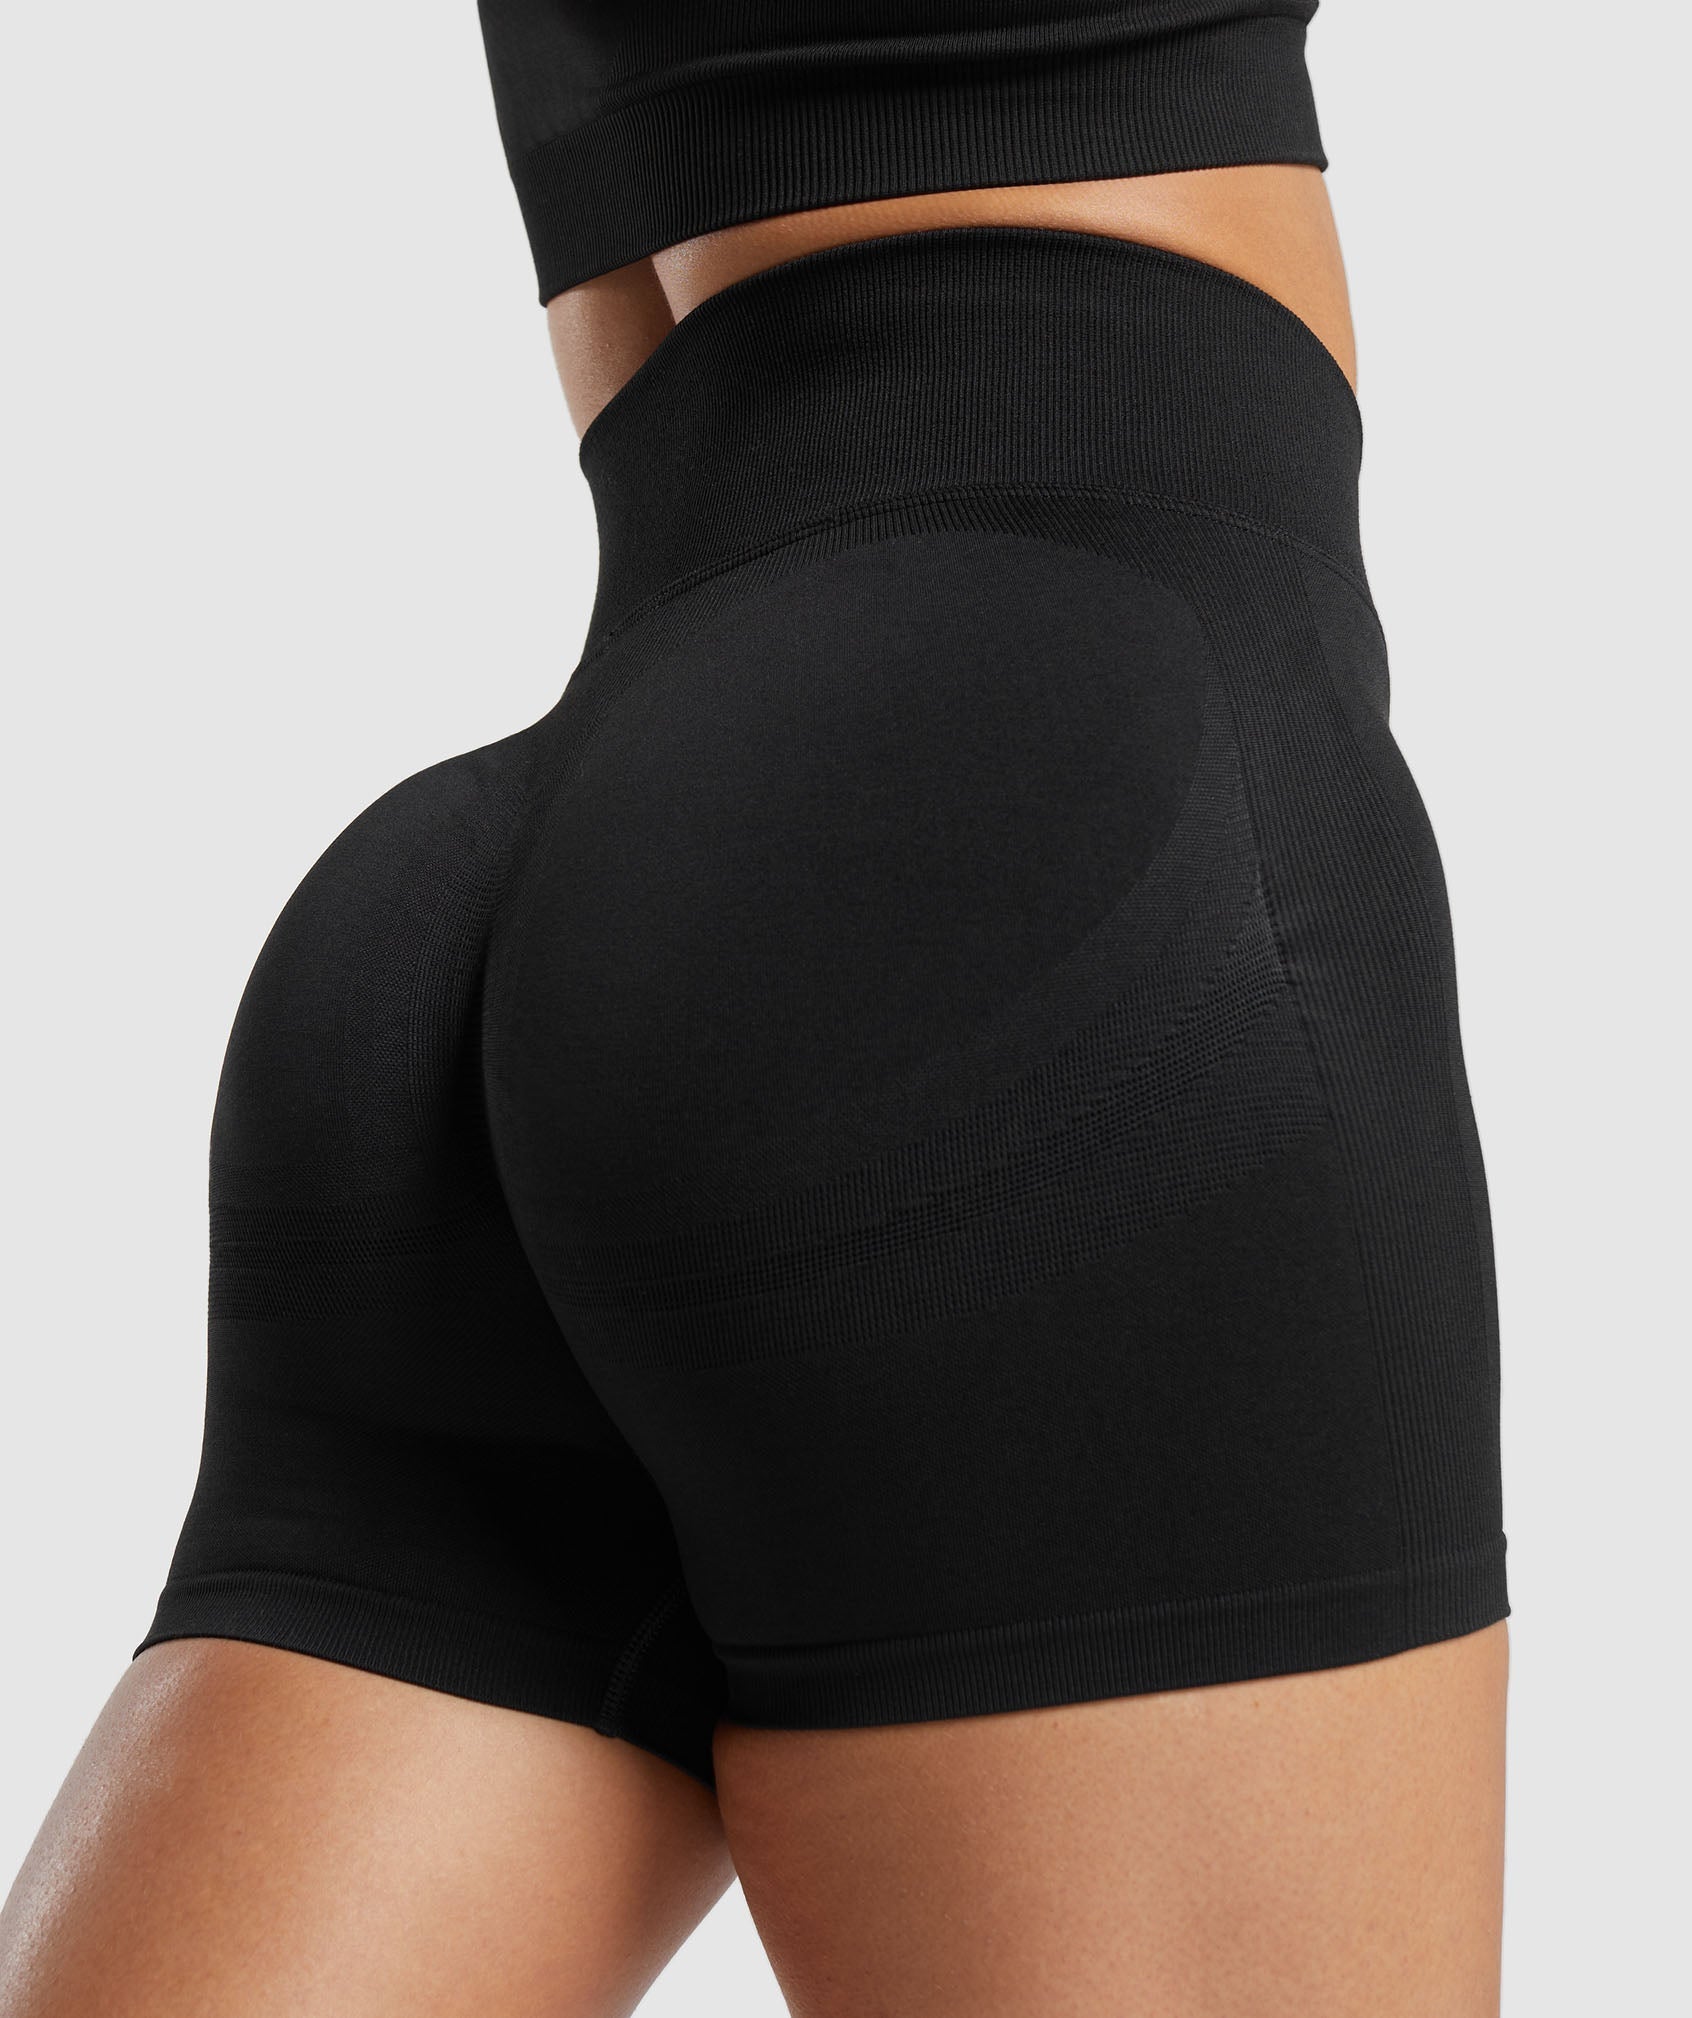 Lift Contour Seamless Shorts in Black/Black Marl - view 7